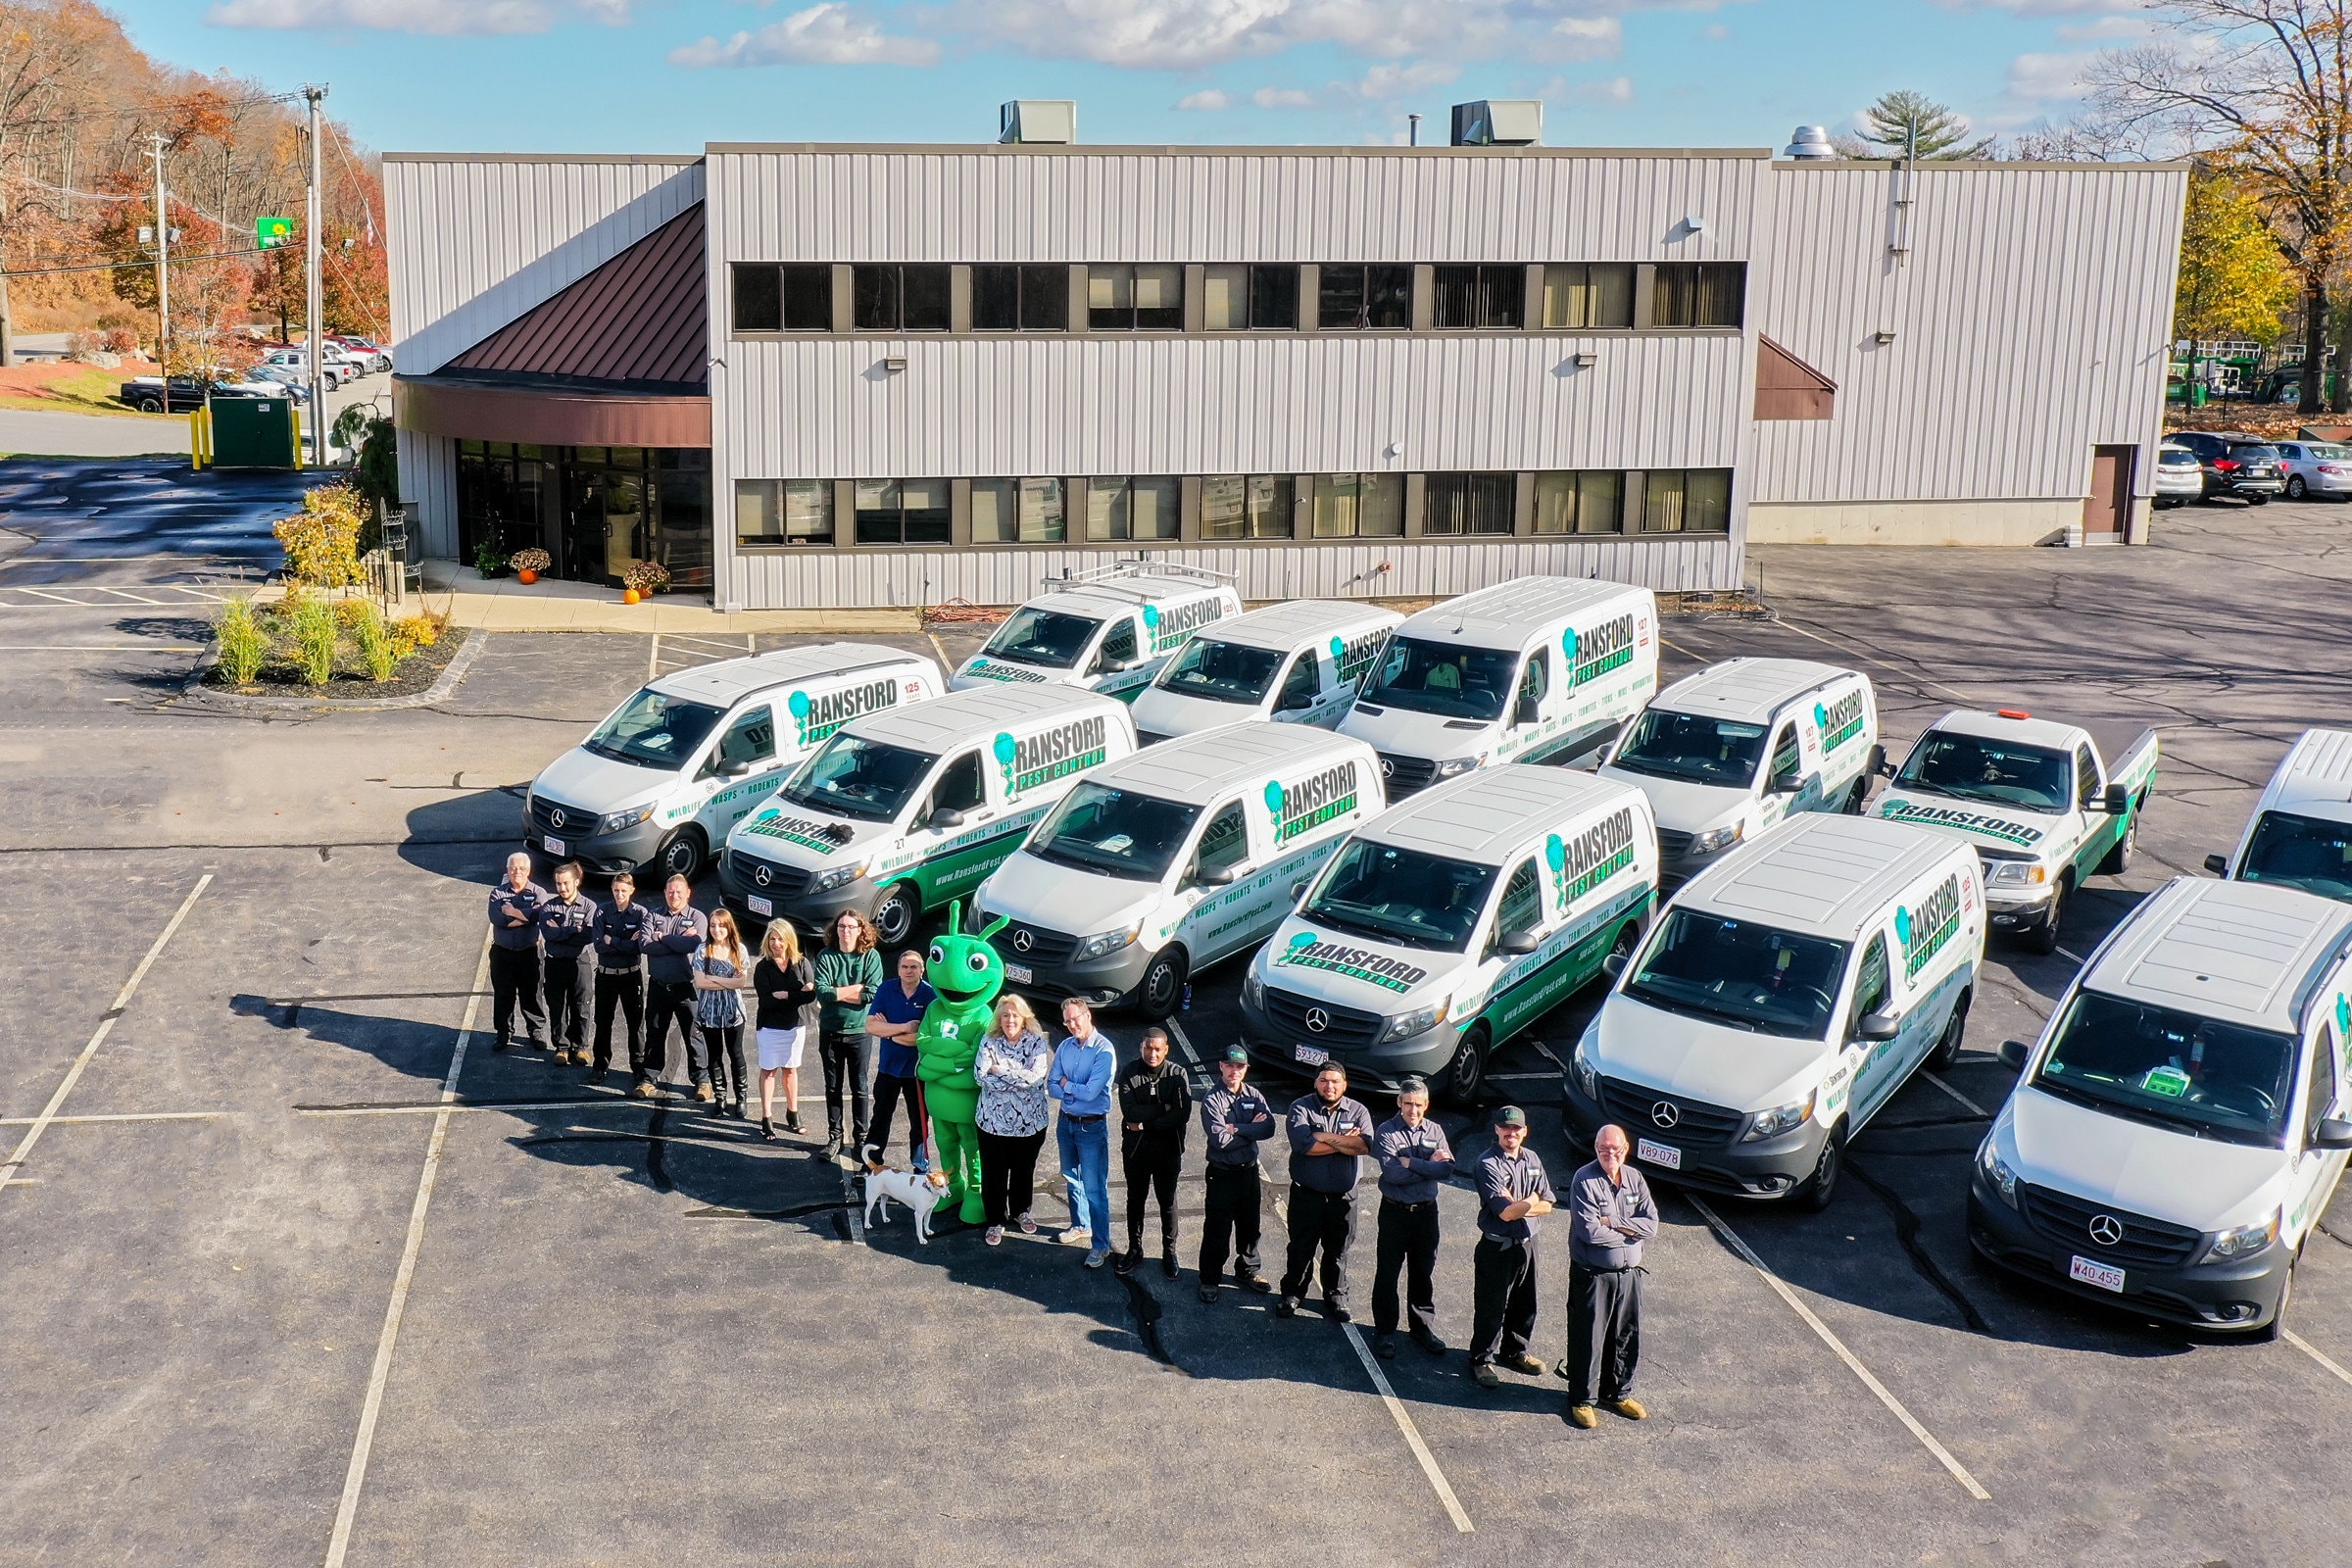 Ransford Pest Control offers quality service to Central Massachusetts